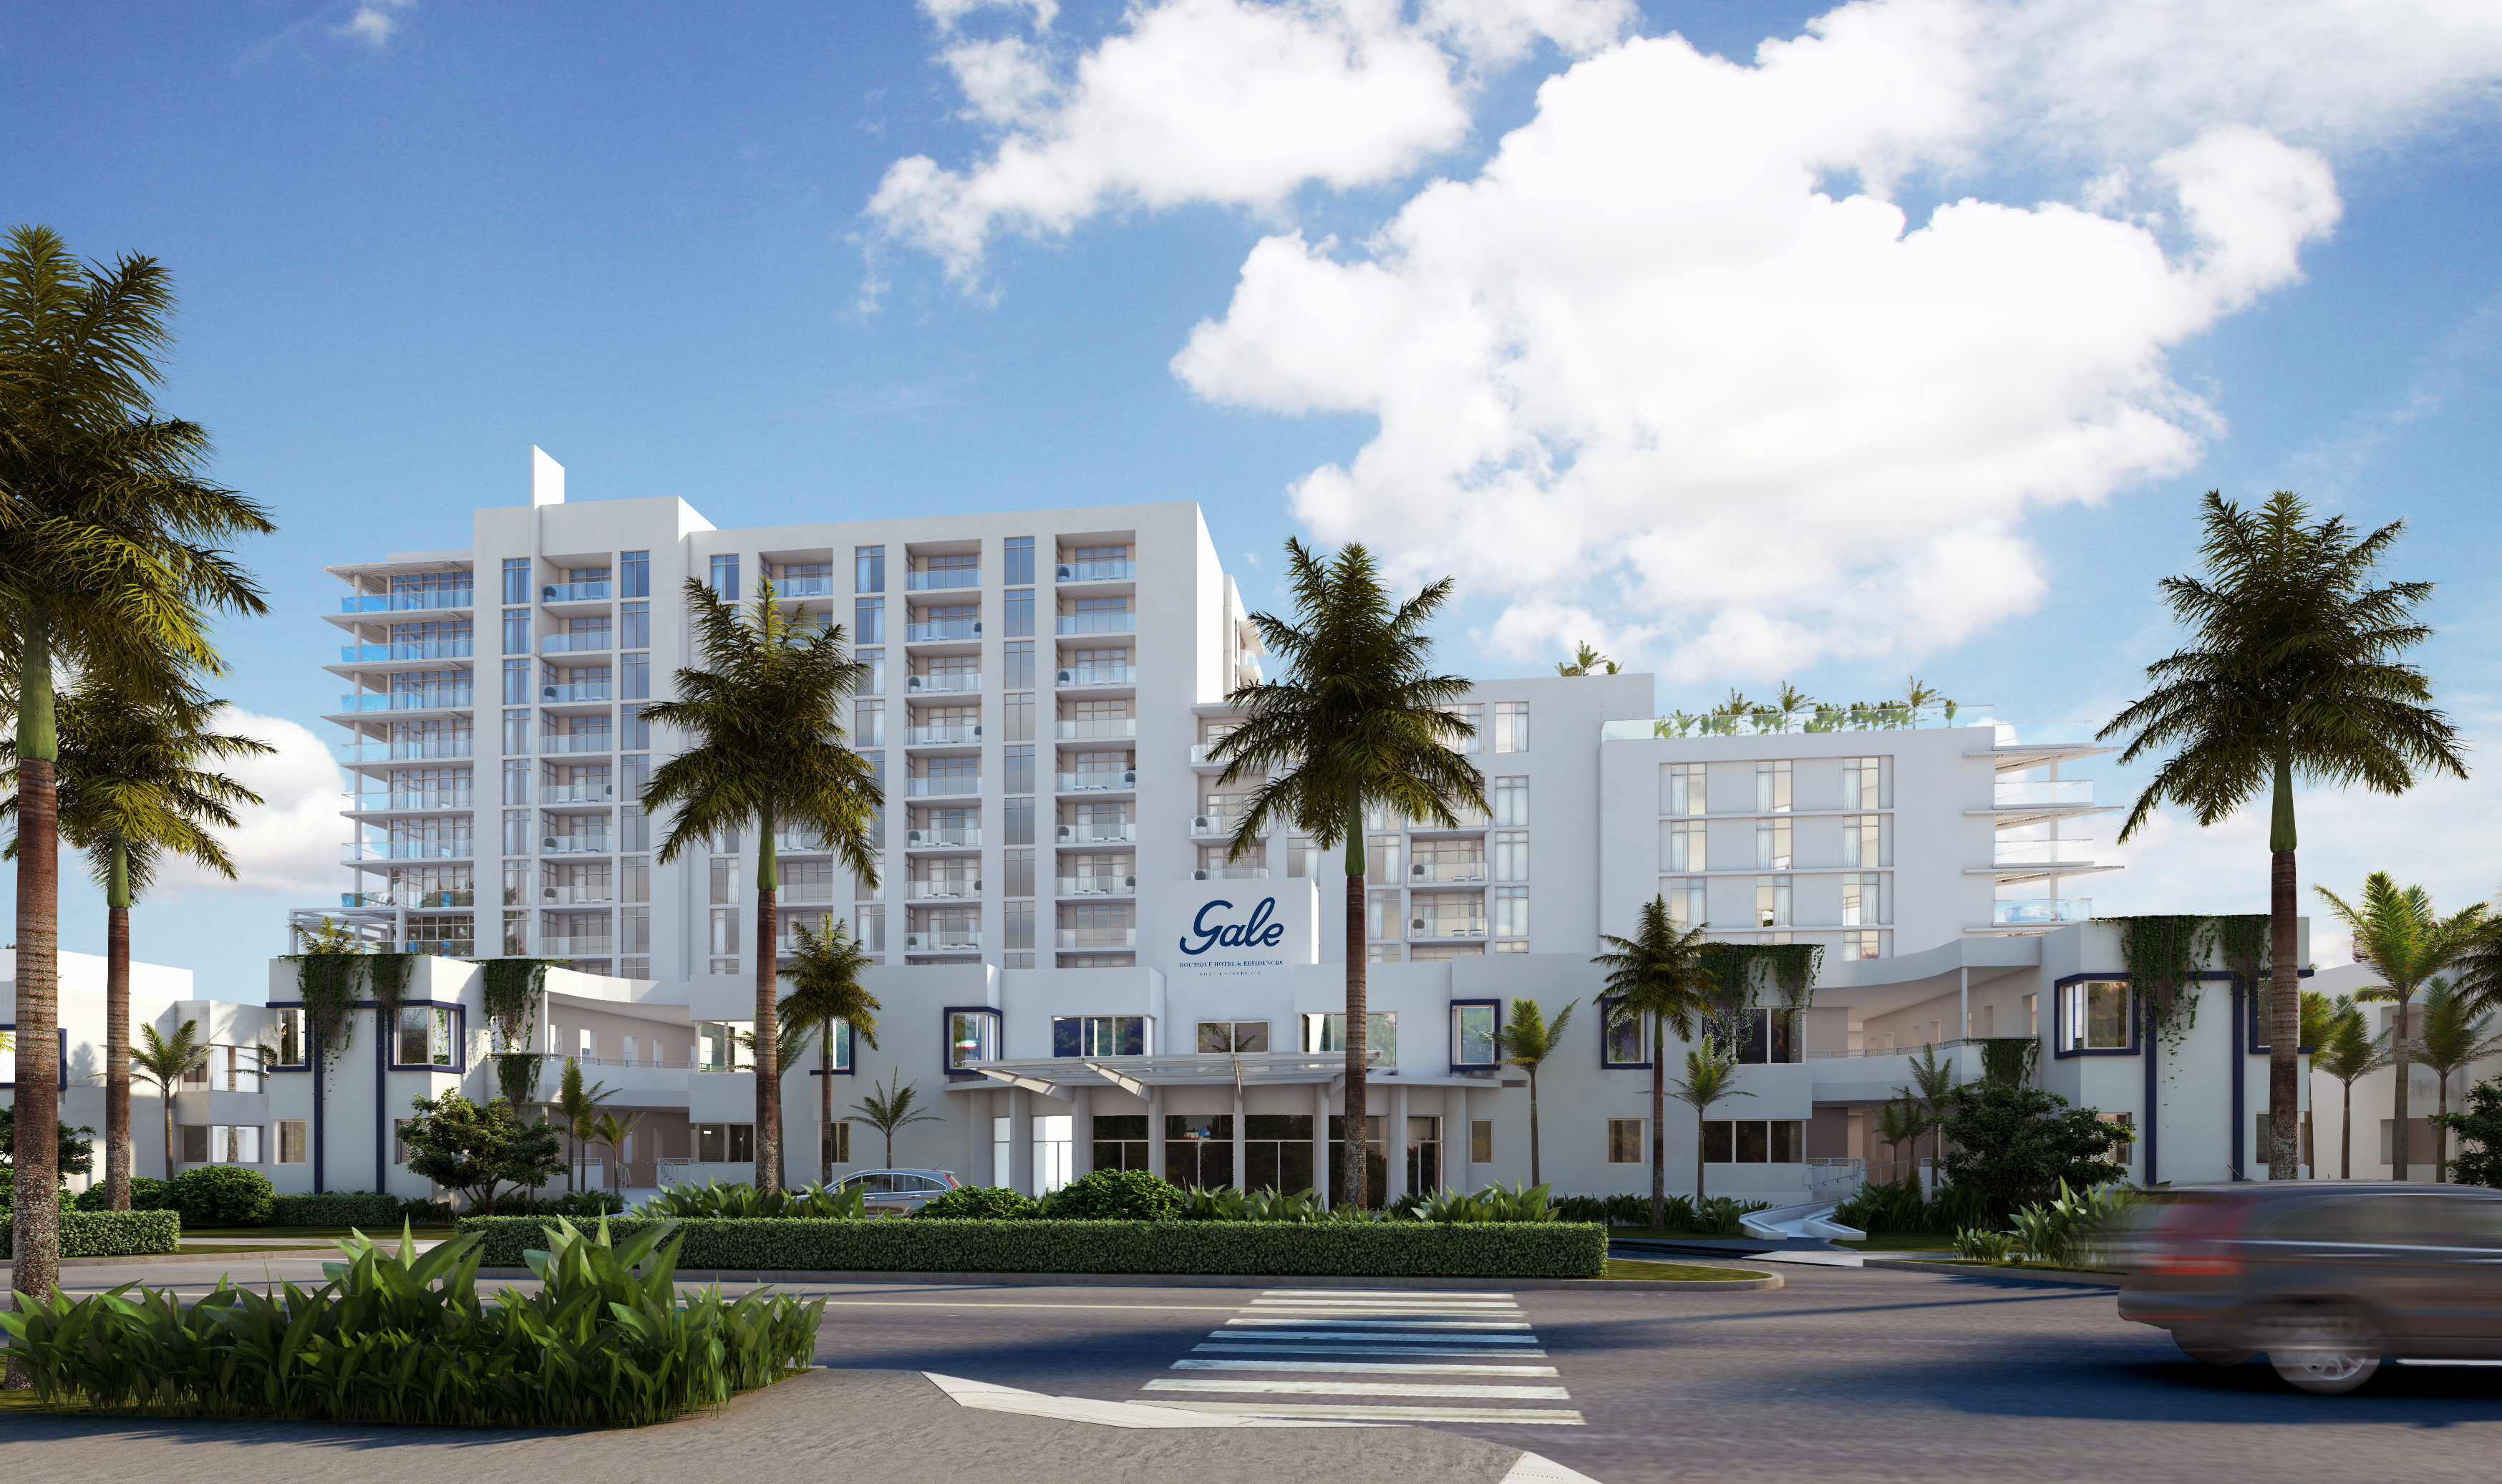 The Gale Fort Lauderdale